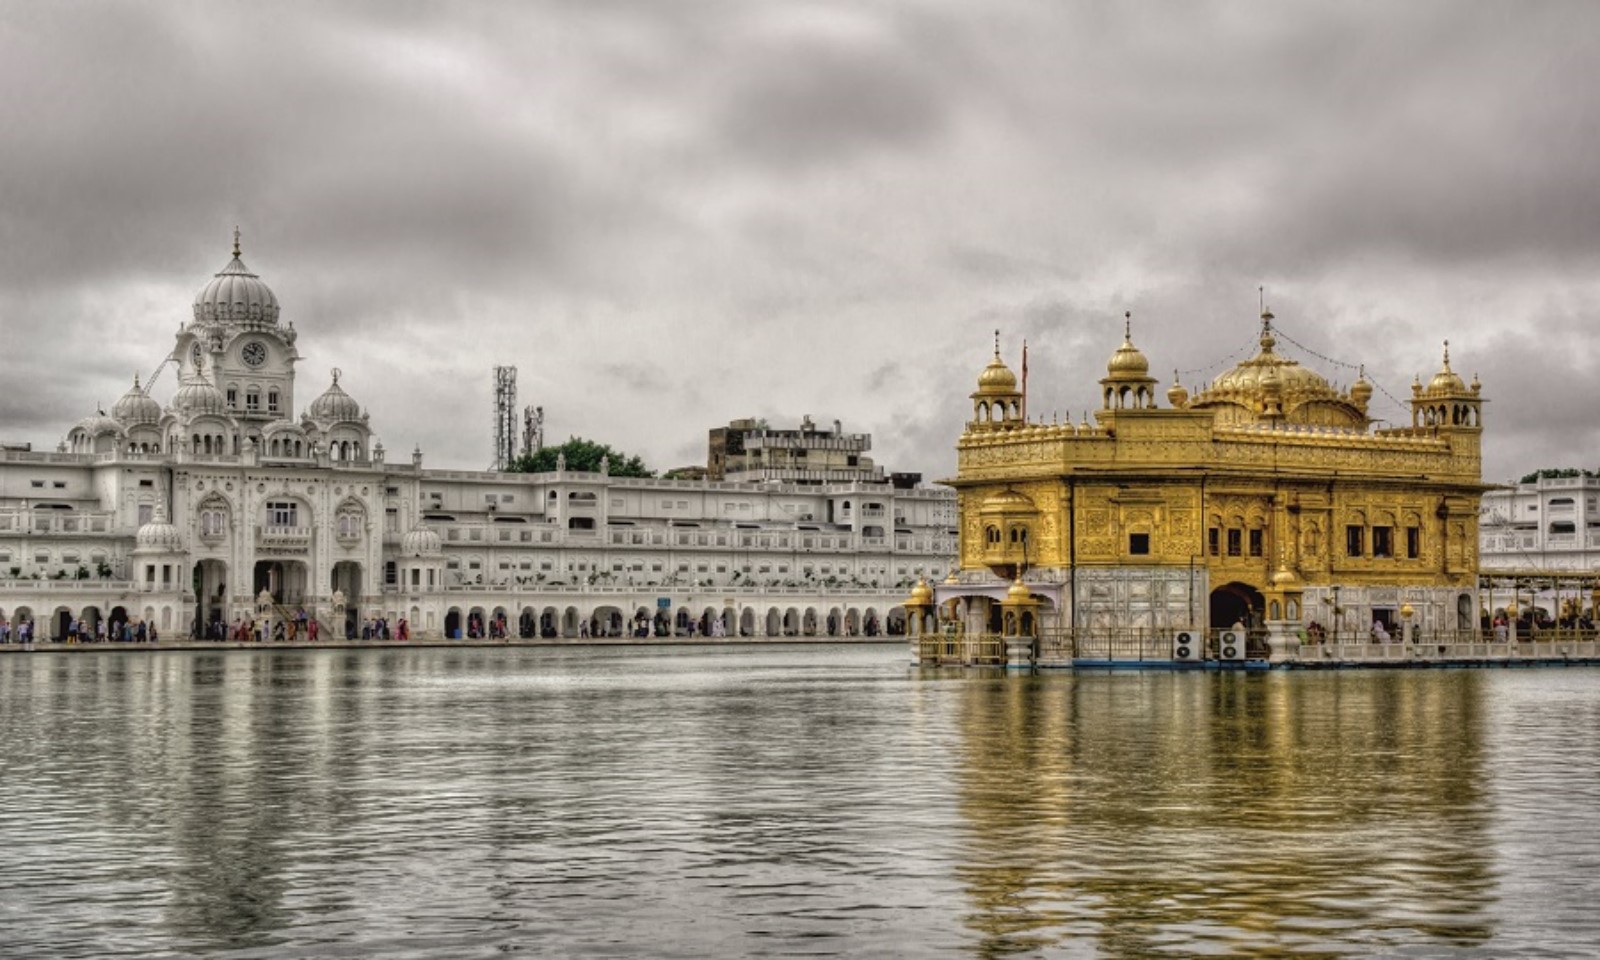 Buy digial wallpaper of the famous Golden Temple in Amritsar